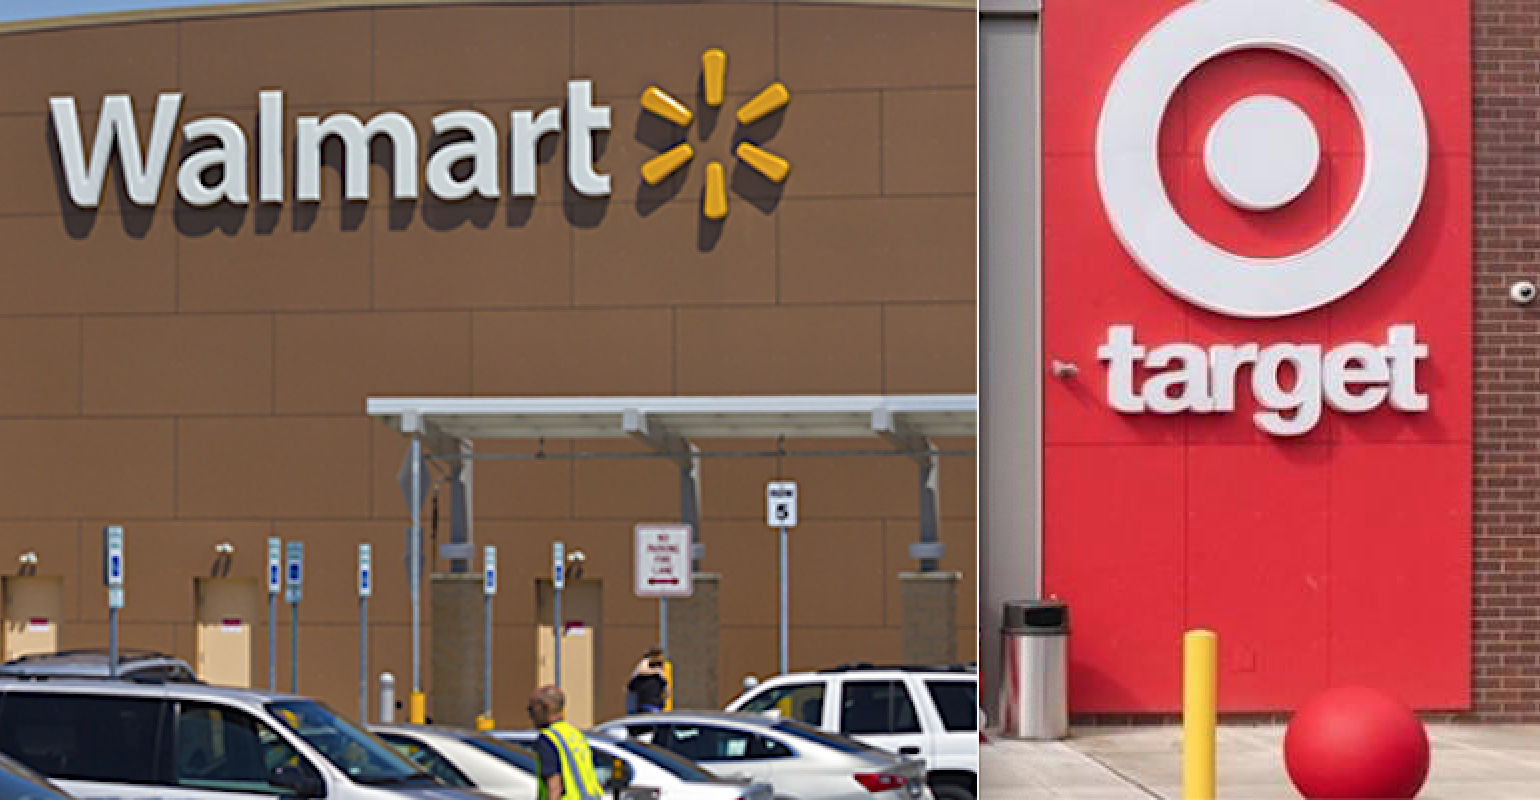 Walmart invests $550M, Target $300M in employees